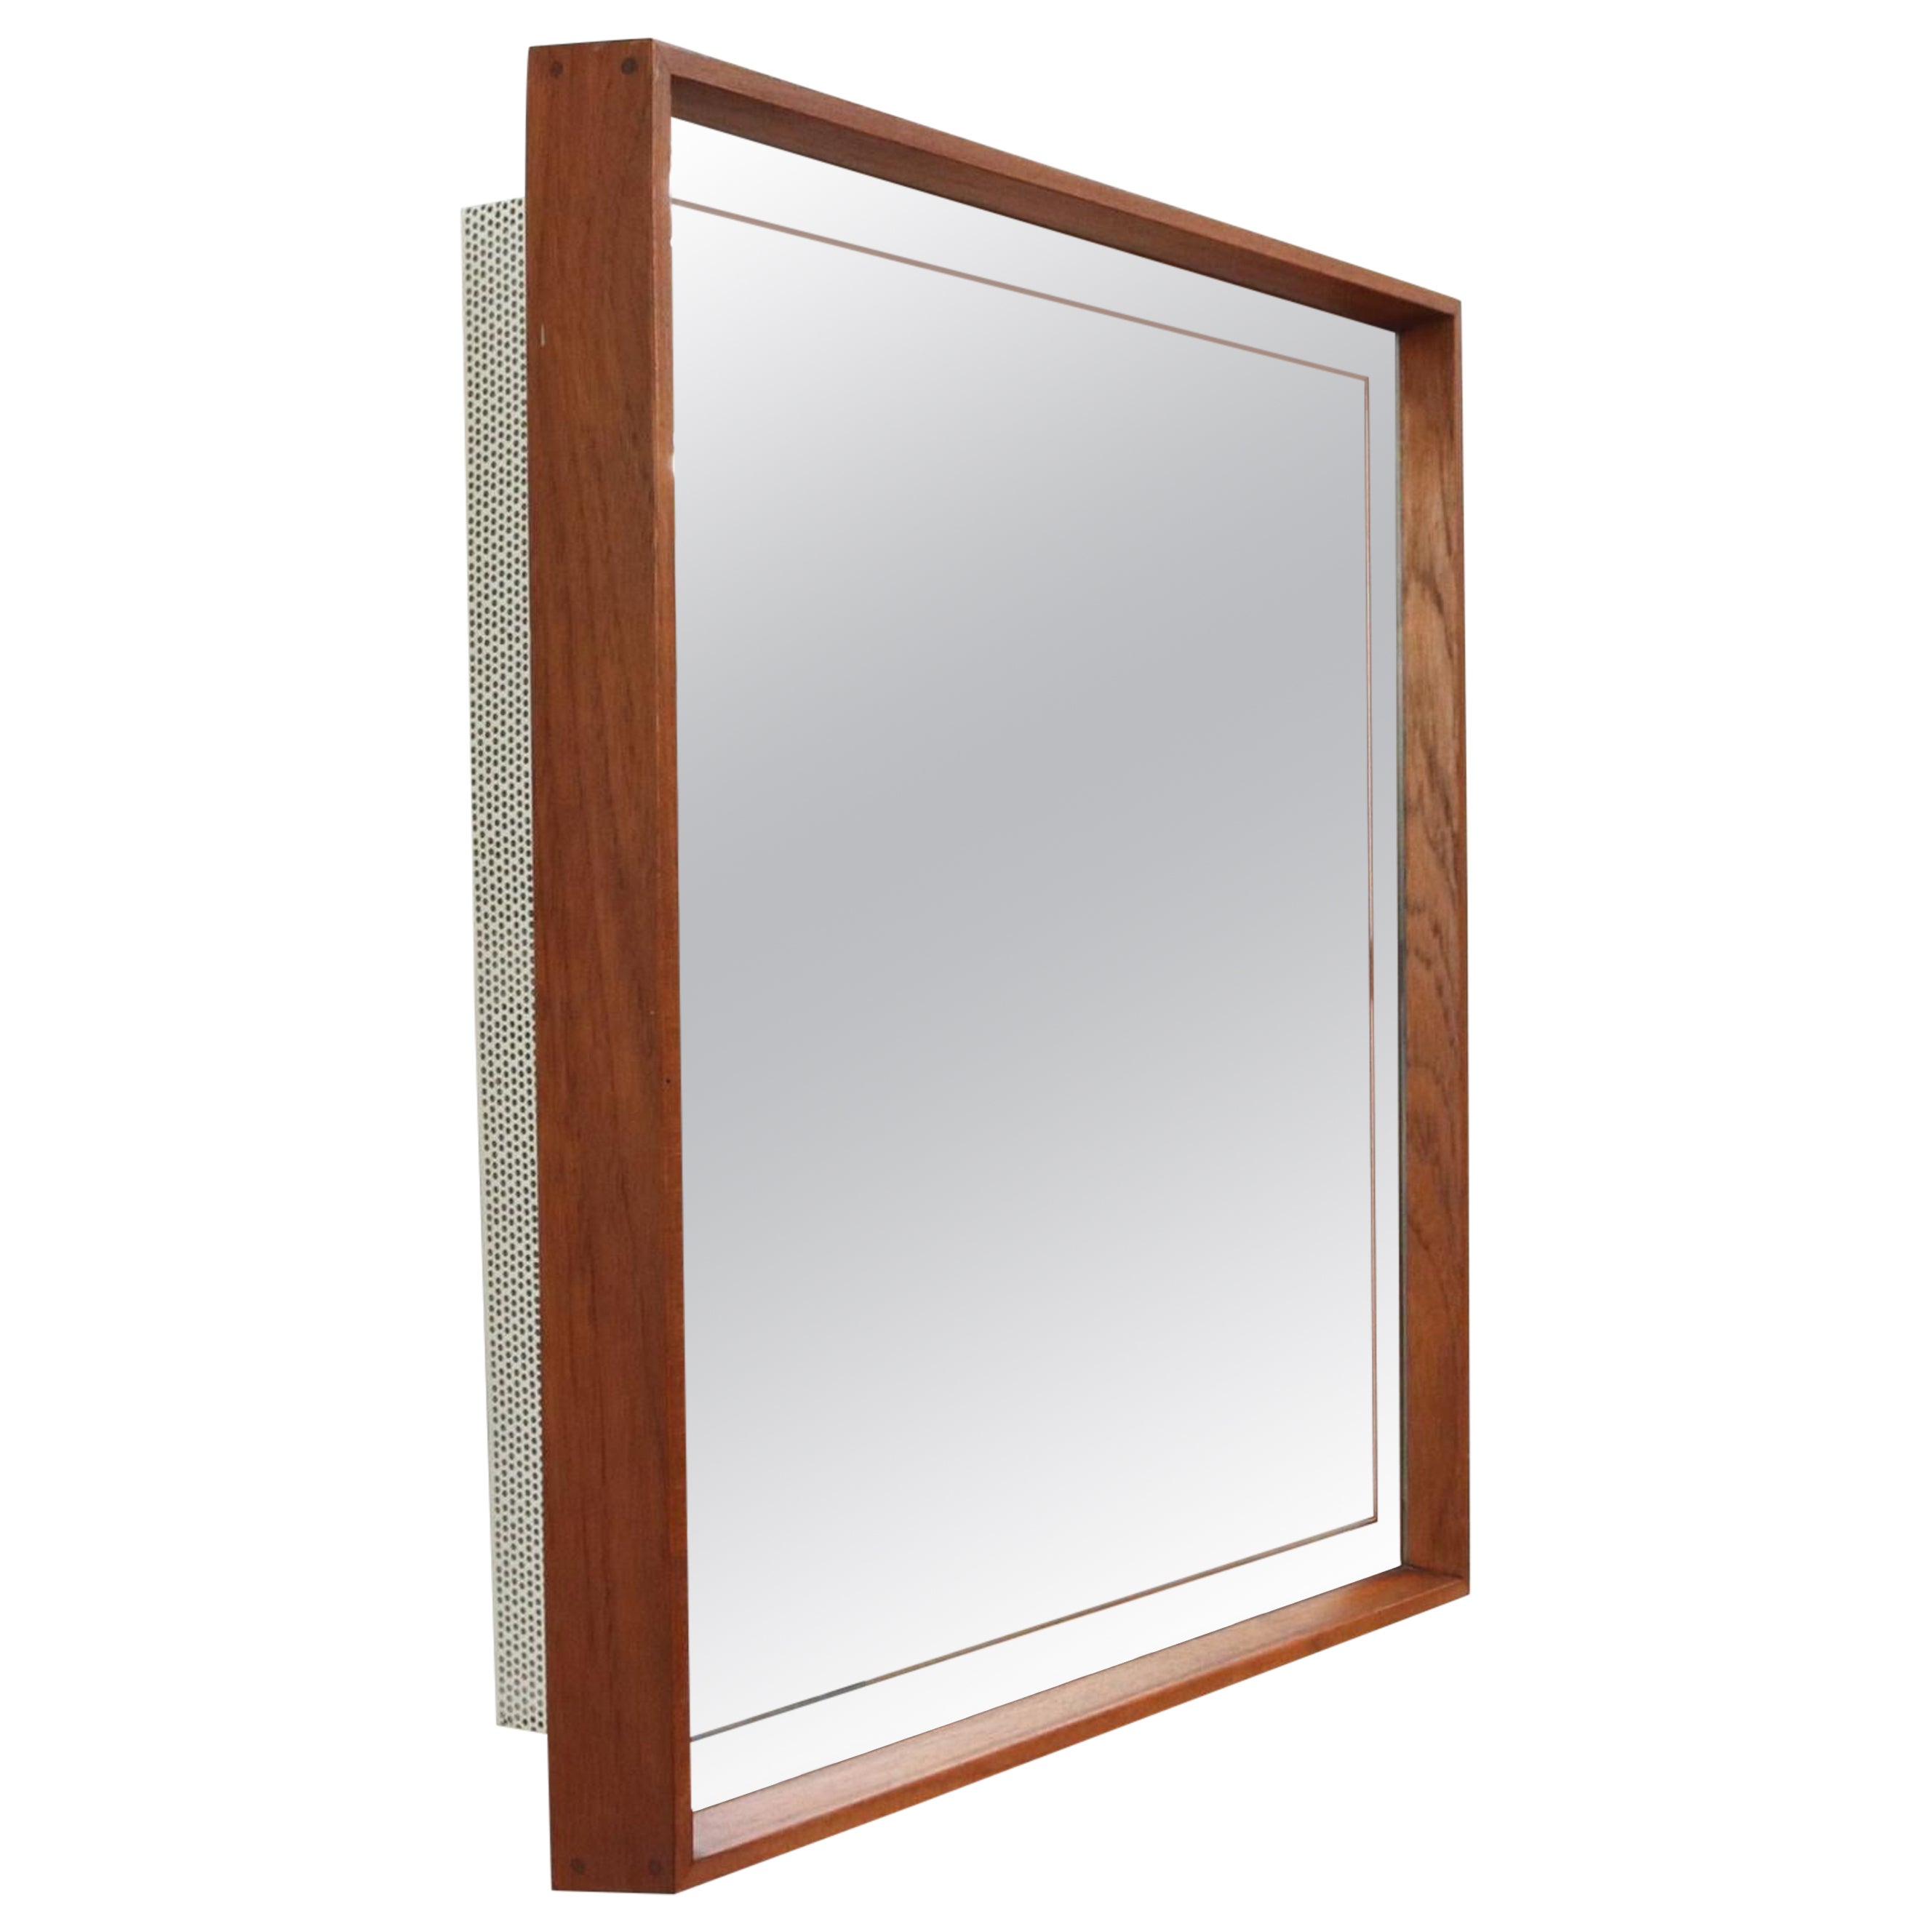 Mategot Inspired Backlit Mirror with Perforated White Metal Frame and Teak Frame